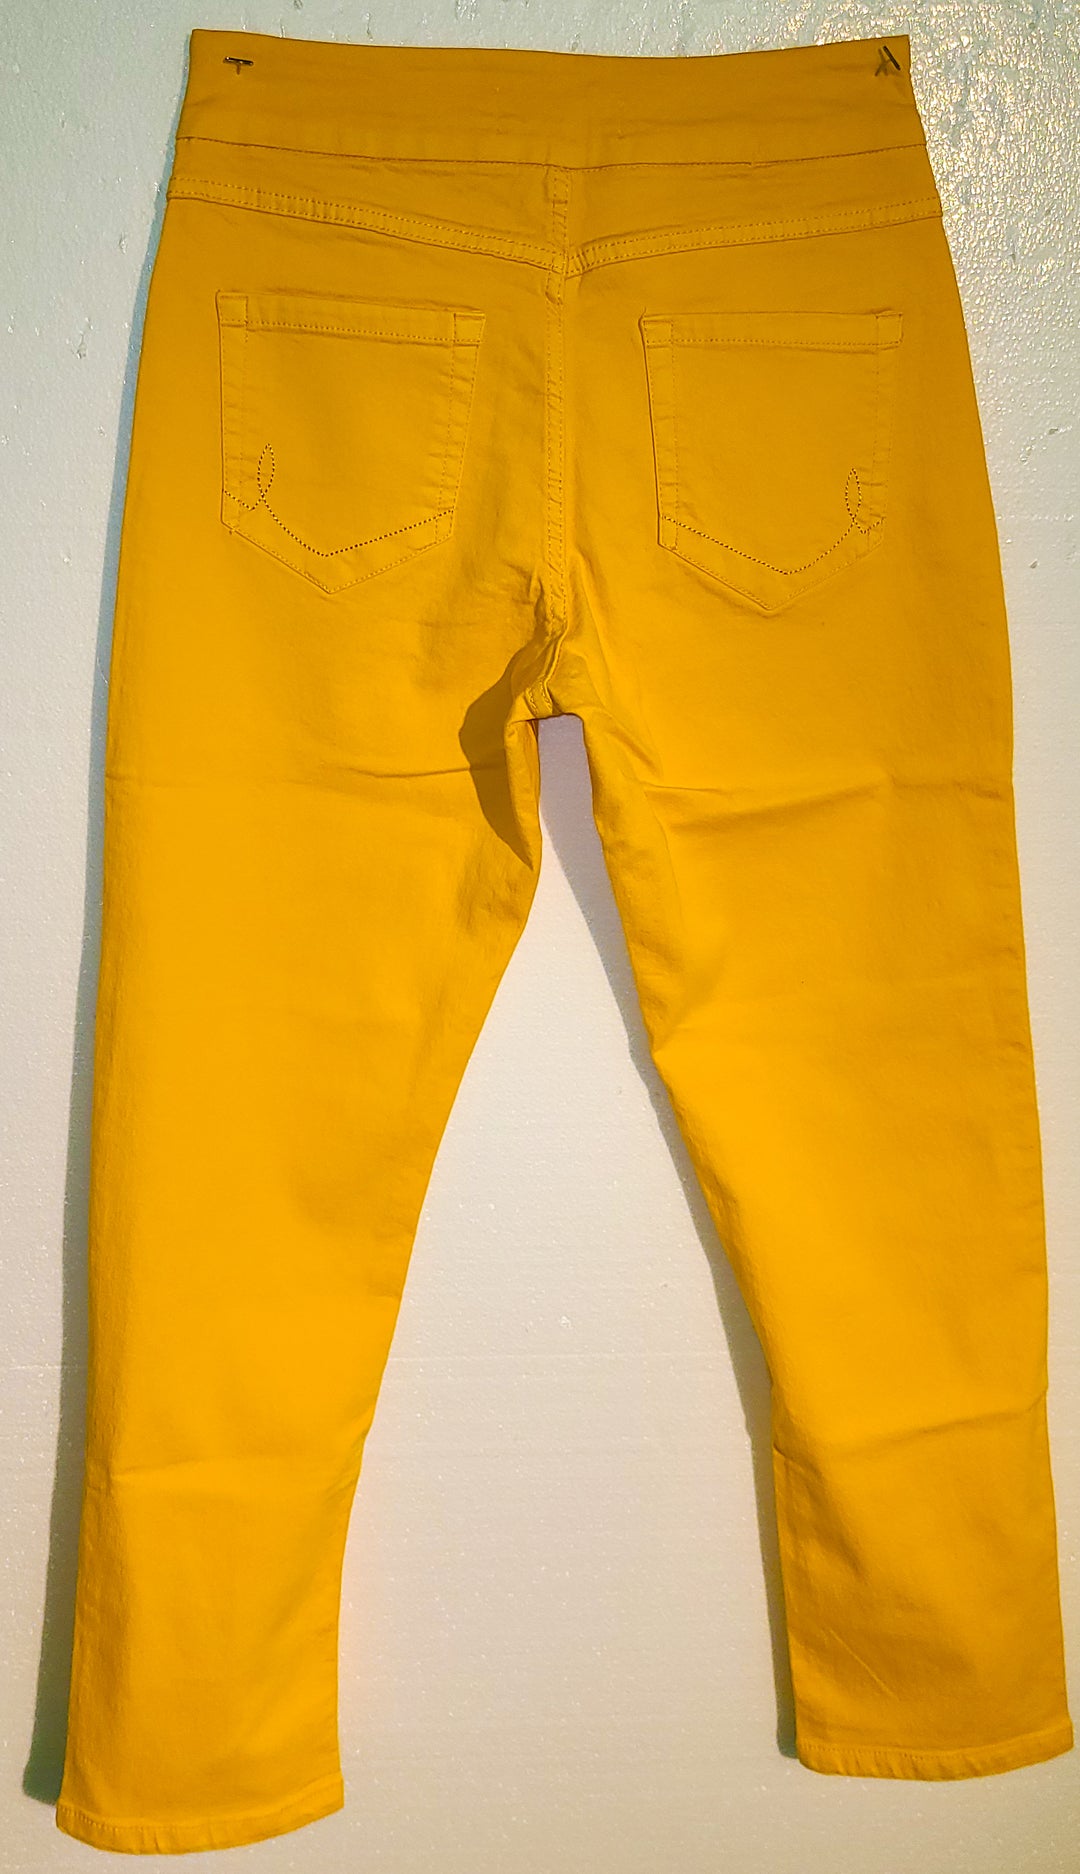 Yellow jeans